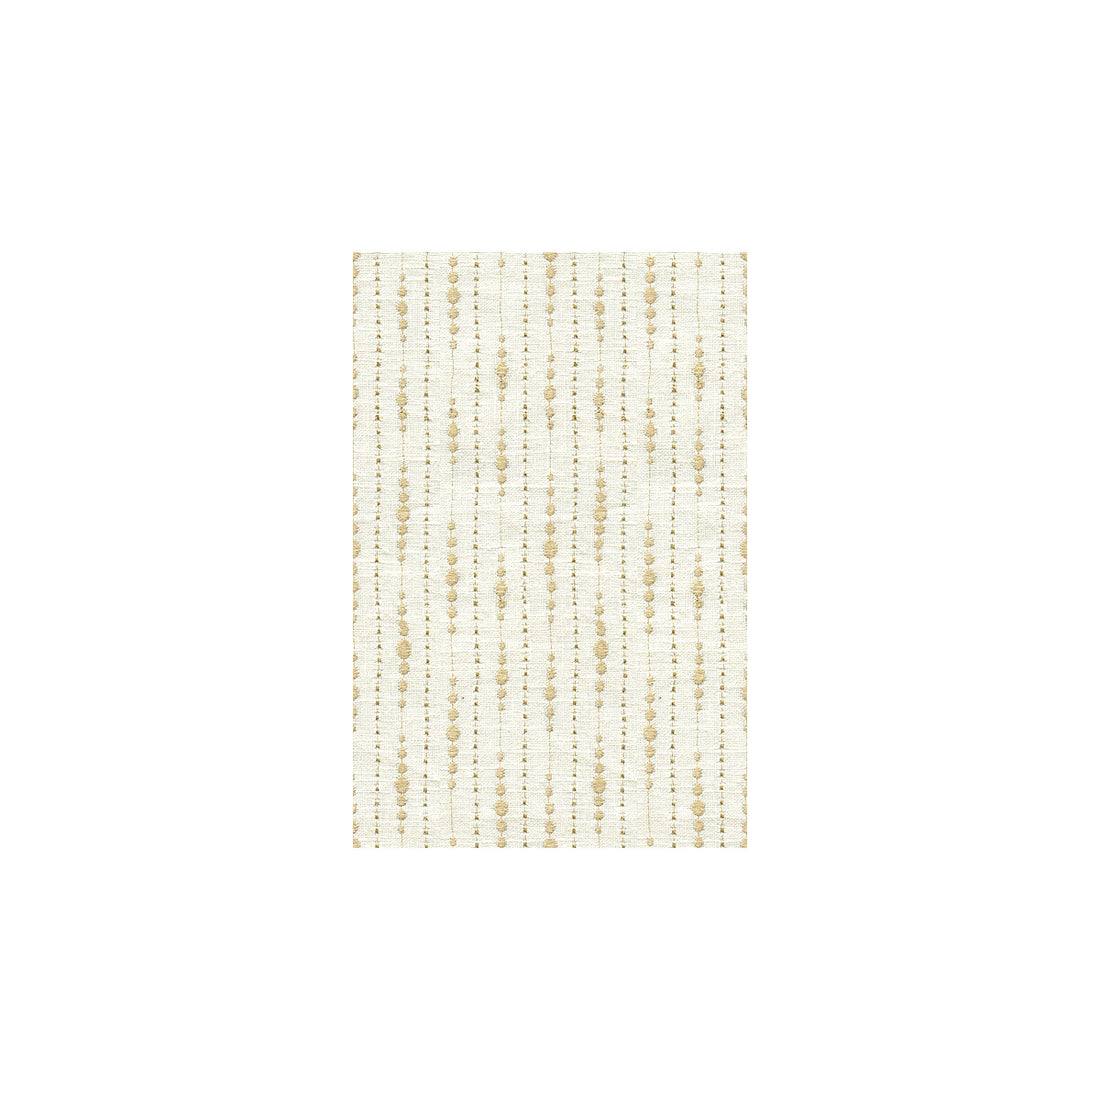 Fabius fabric in sand color - pattern 9814.1.0 - by Kravet Design in the Thom Filicia collection